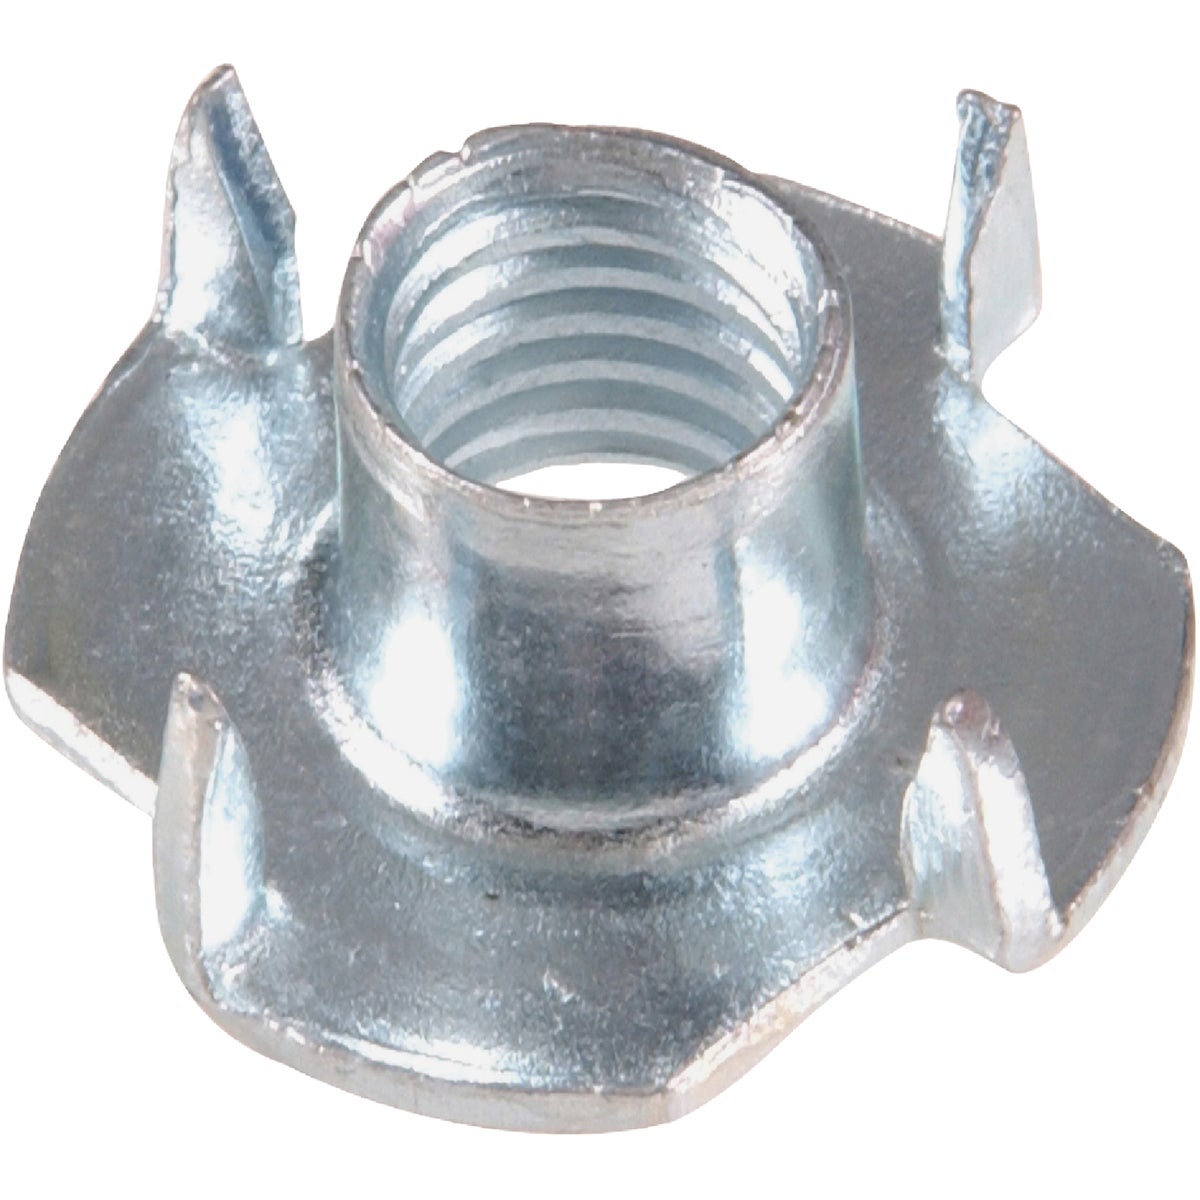 Hillman 3/8 In. 16 tpi Pronged Tee Nuts (2 Ct.)